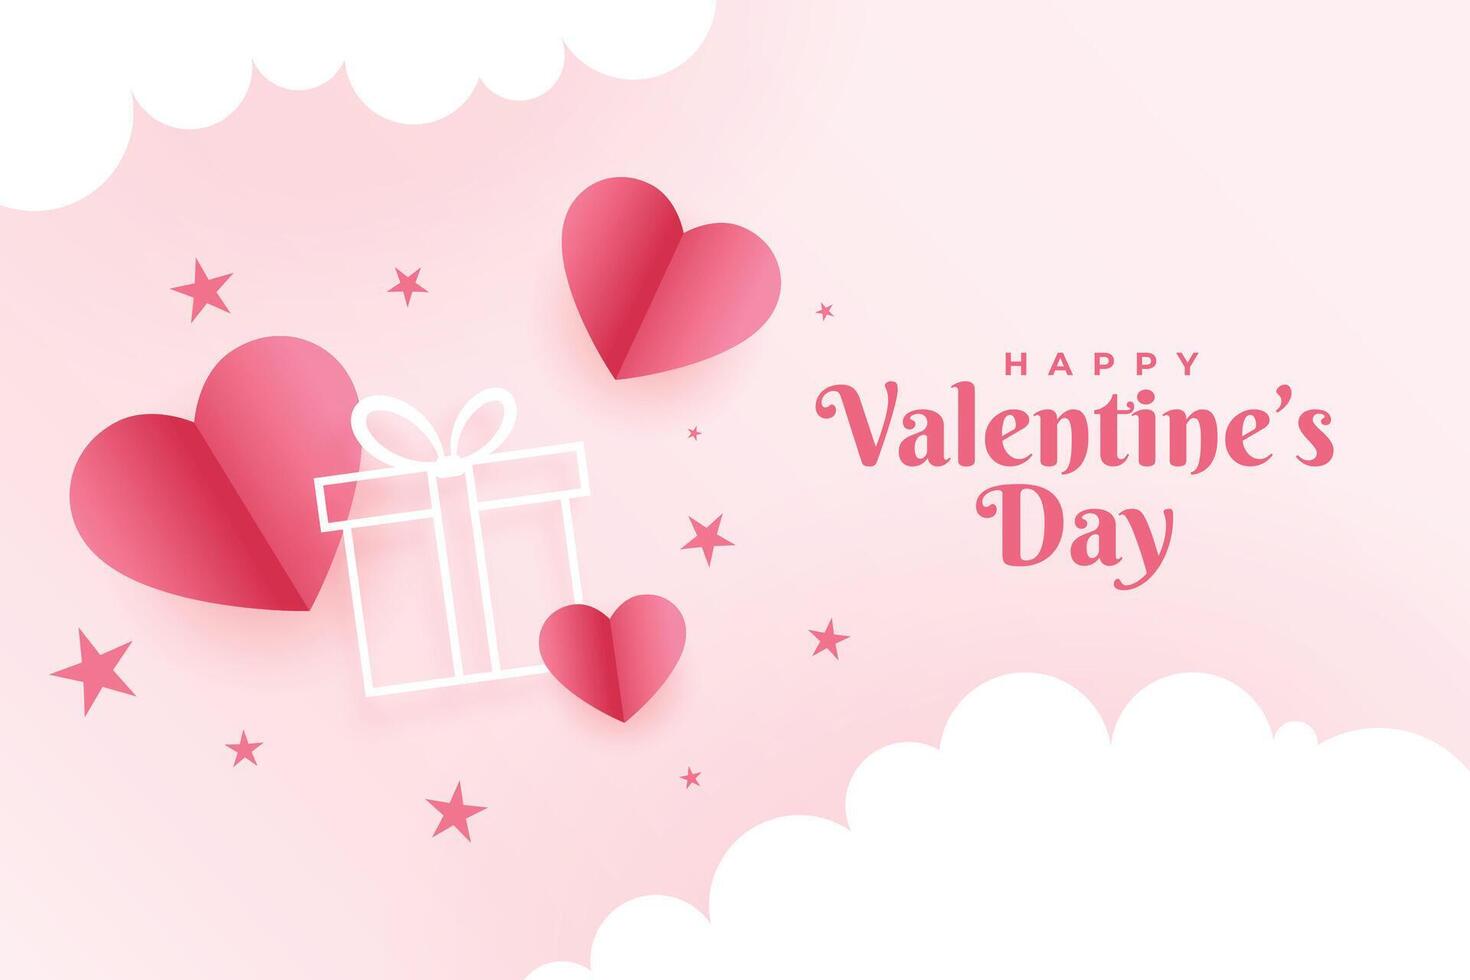 stylish valentines day greeting card with hearts and gift box design vector